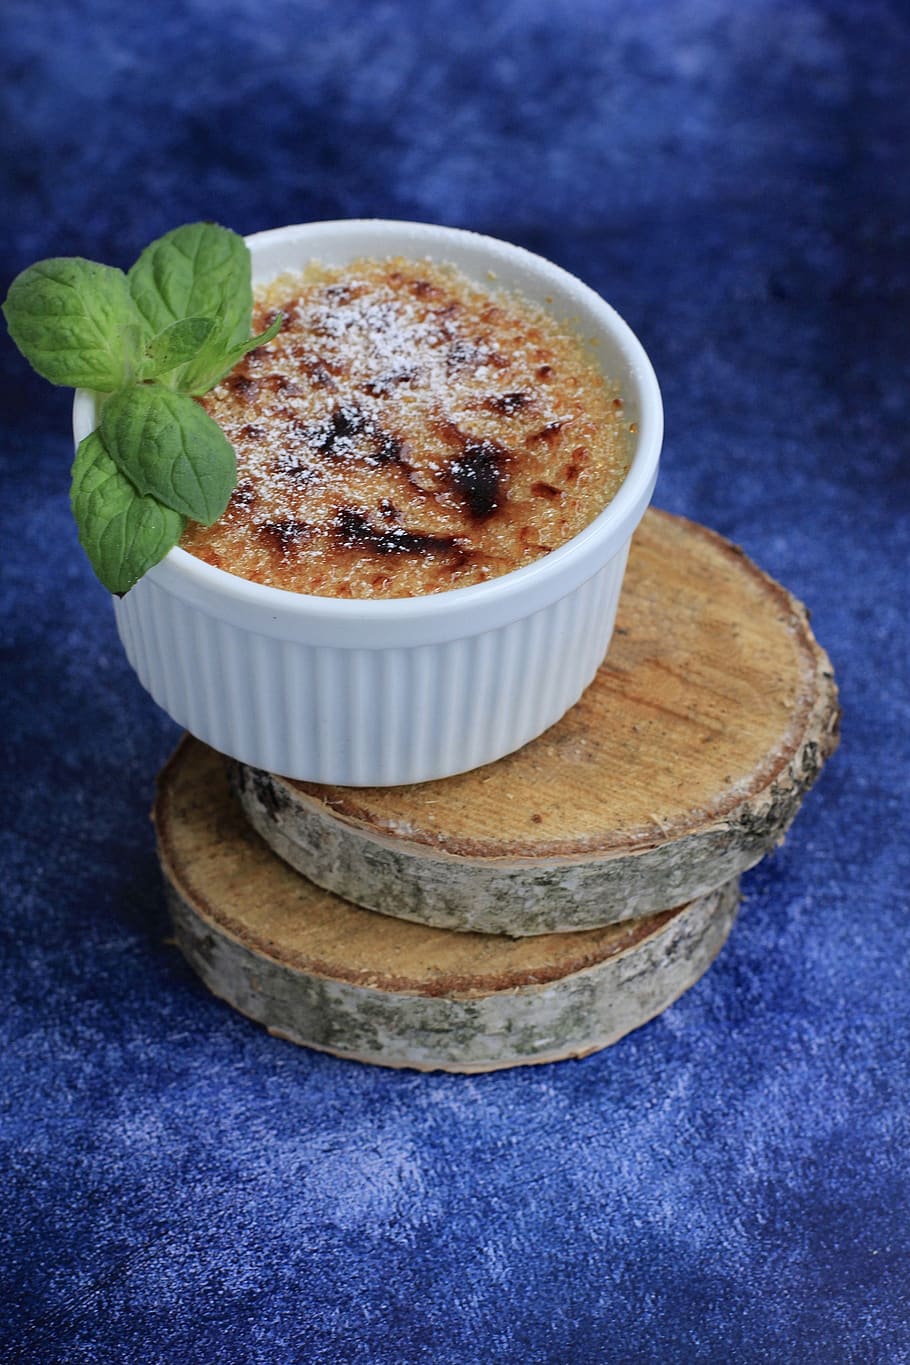 creme brulee, dessert, blue, creamy, food and drink, food, freshness, ready-to-eat, sweet food, still life